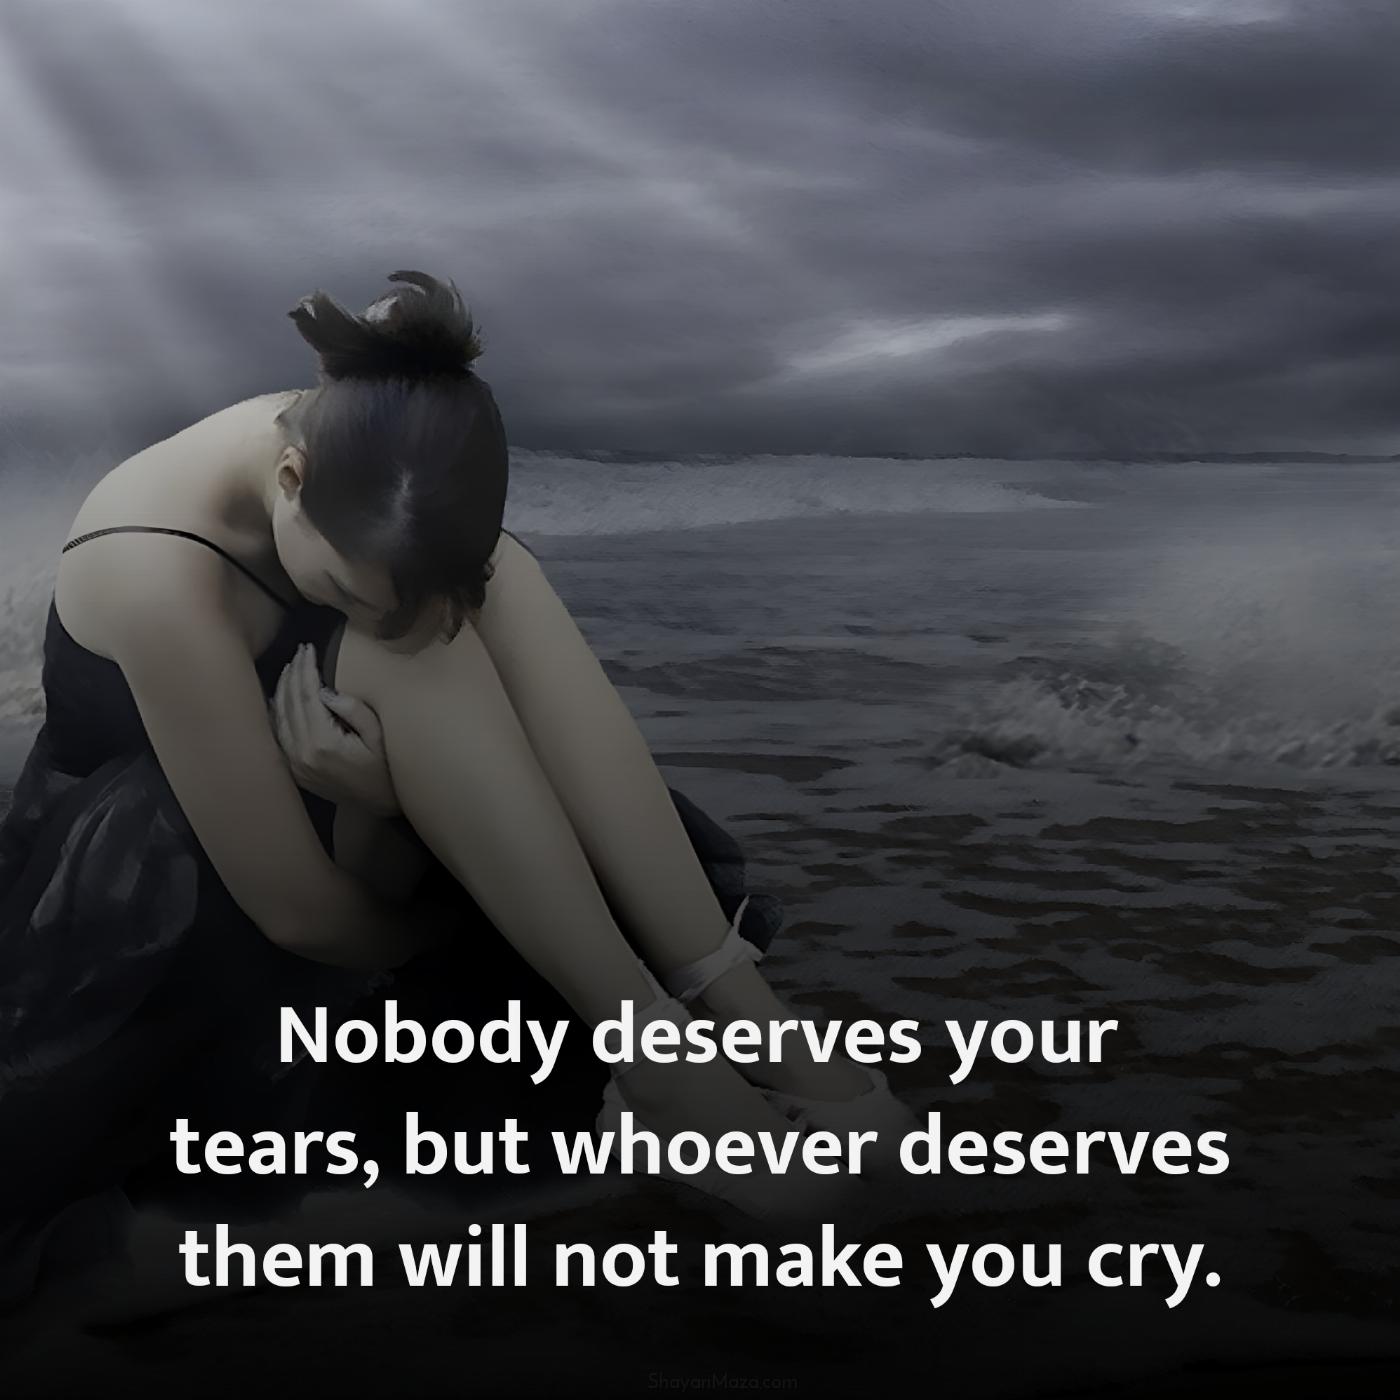 Nobody deserves your tears but whoever deserves them